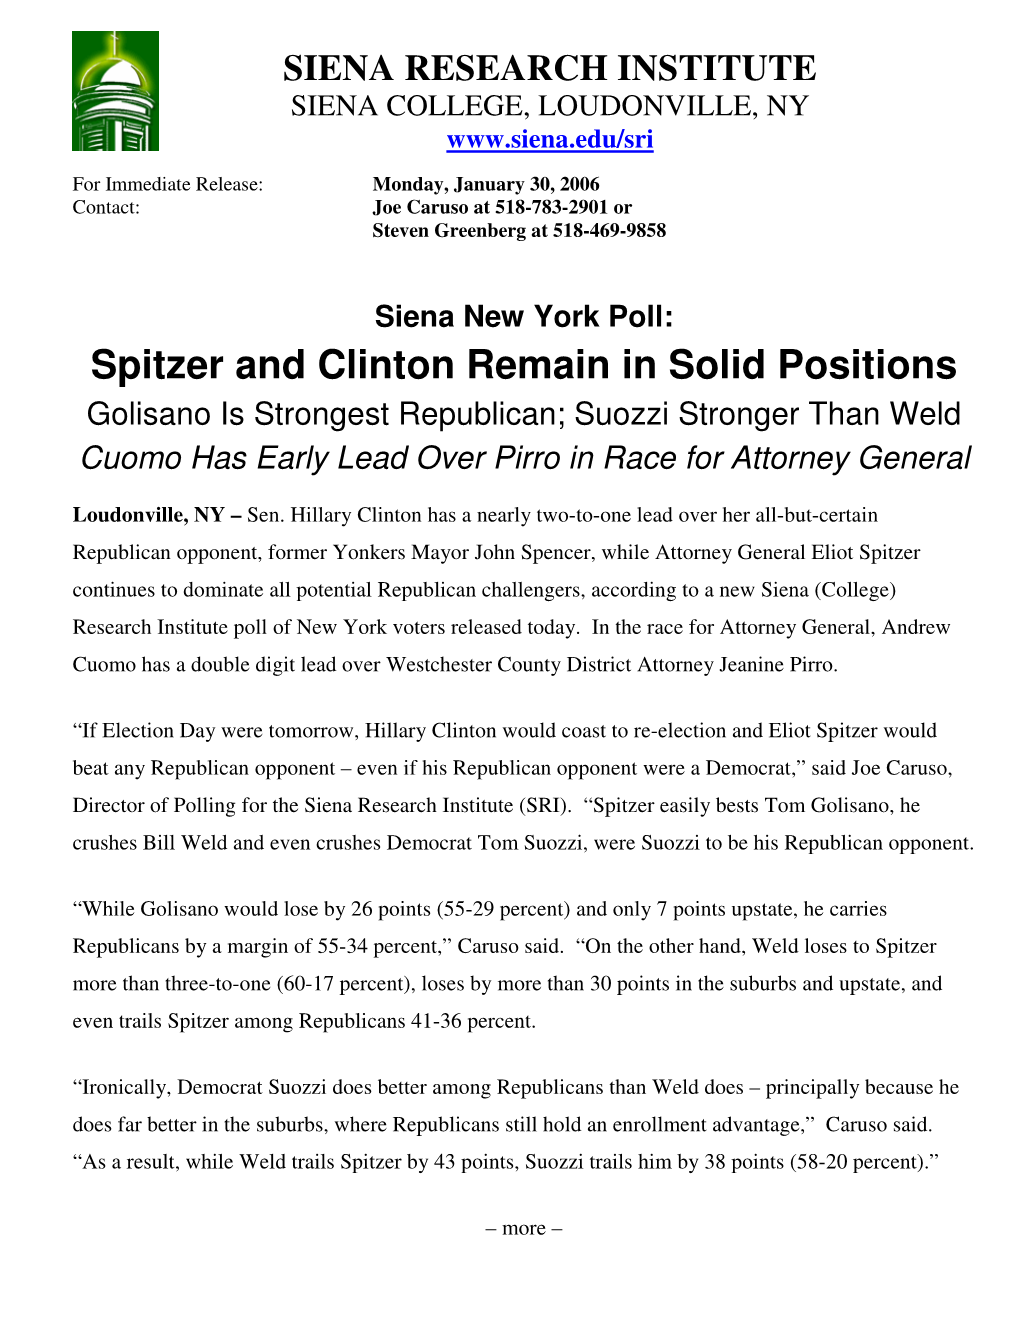 Spitzer and Clinton Remain in Solid Positions